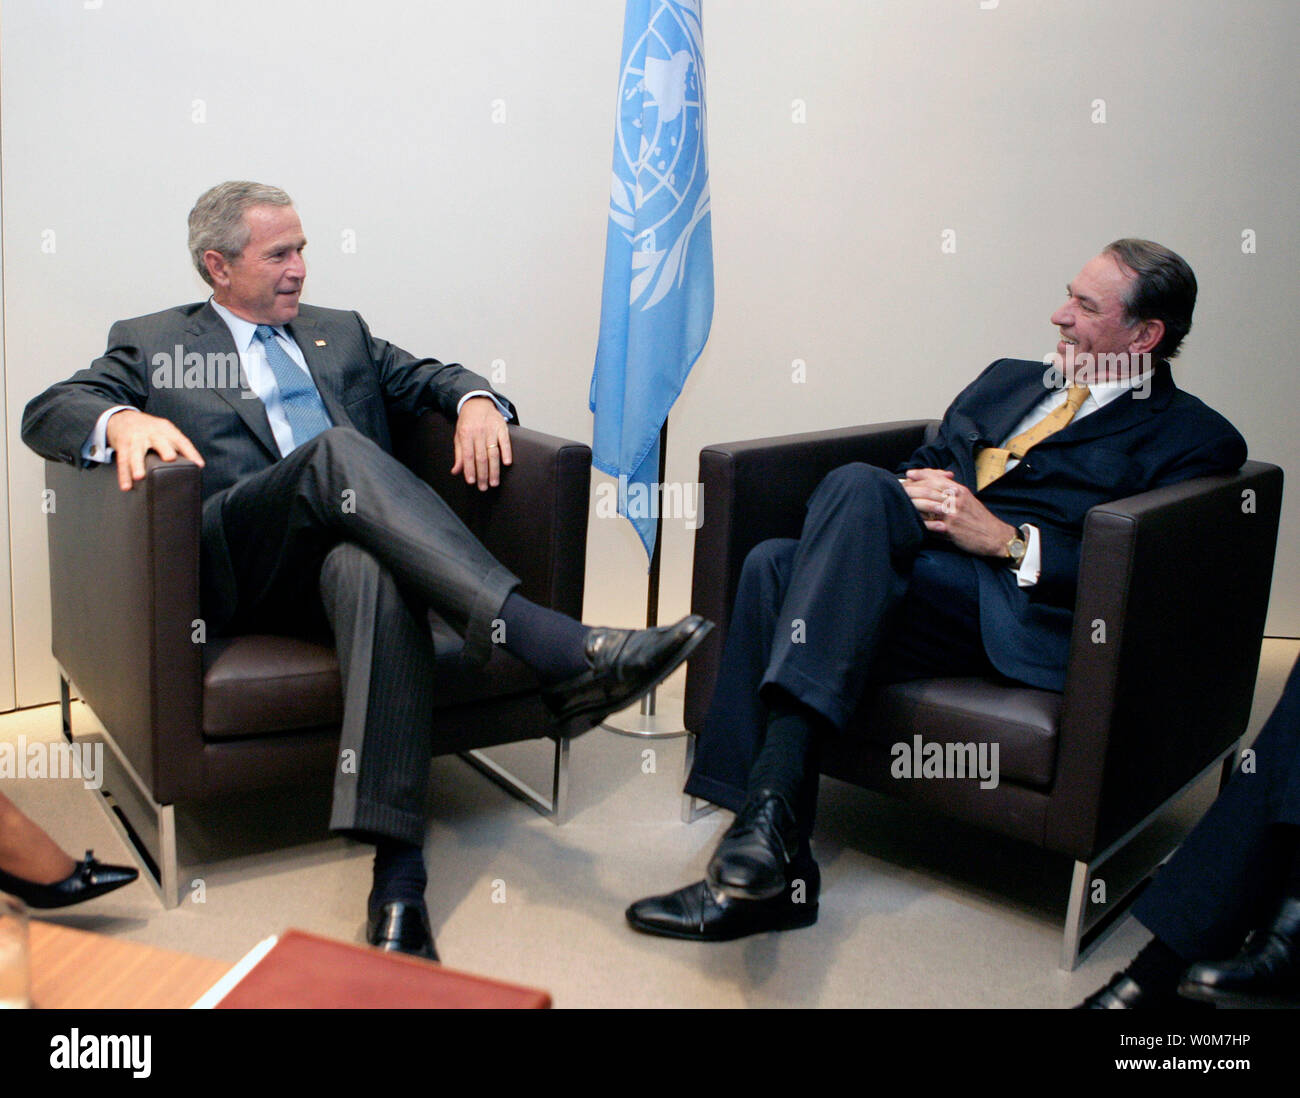 President George W. Bush meets with Jan EliassonÊof Sweden, President of the U.N. General Assembly, Tuesday, Sept. 13, 2005, at the United Nations in New YorkÊ.Ê(UPI Photo/ Eric Draper/White House) Stock Photo